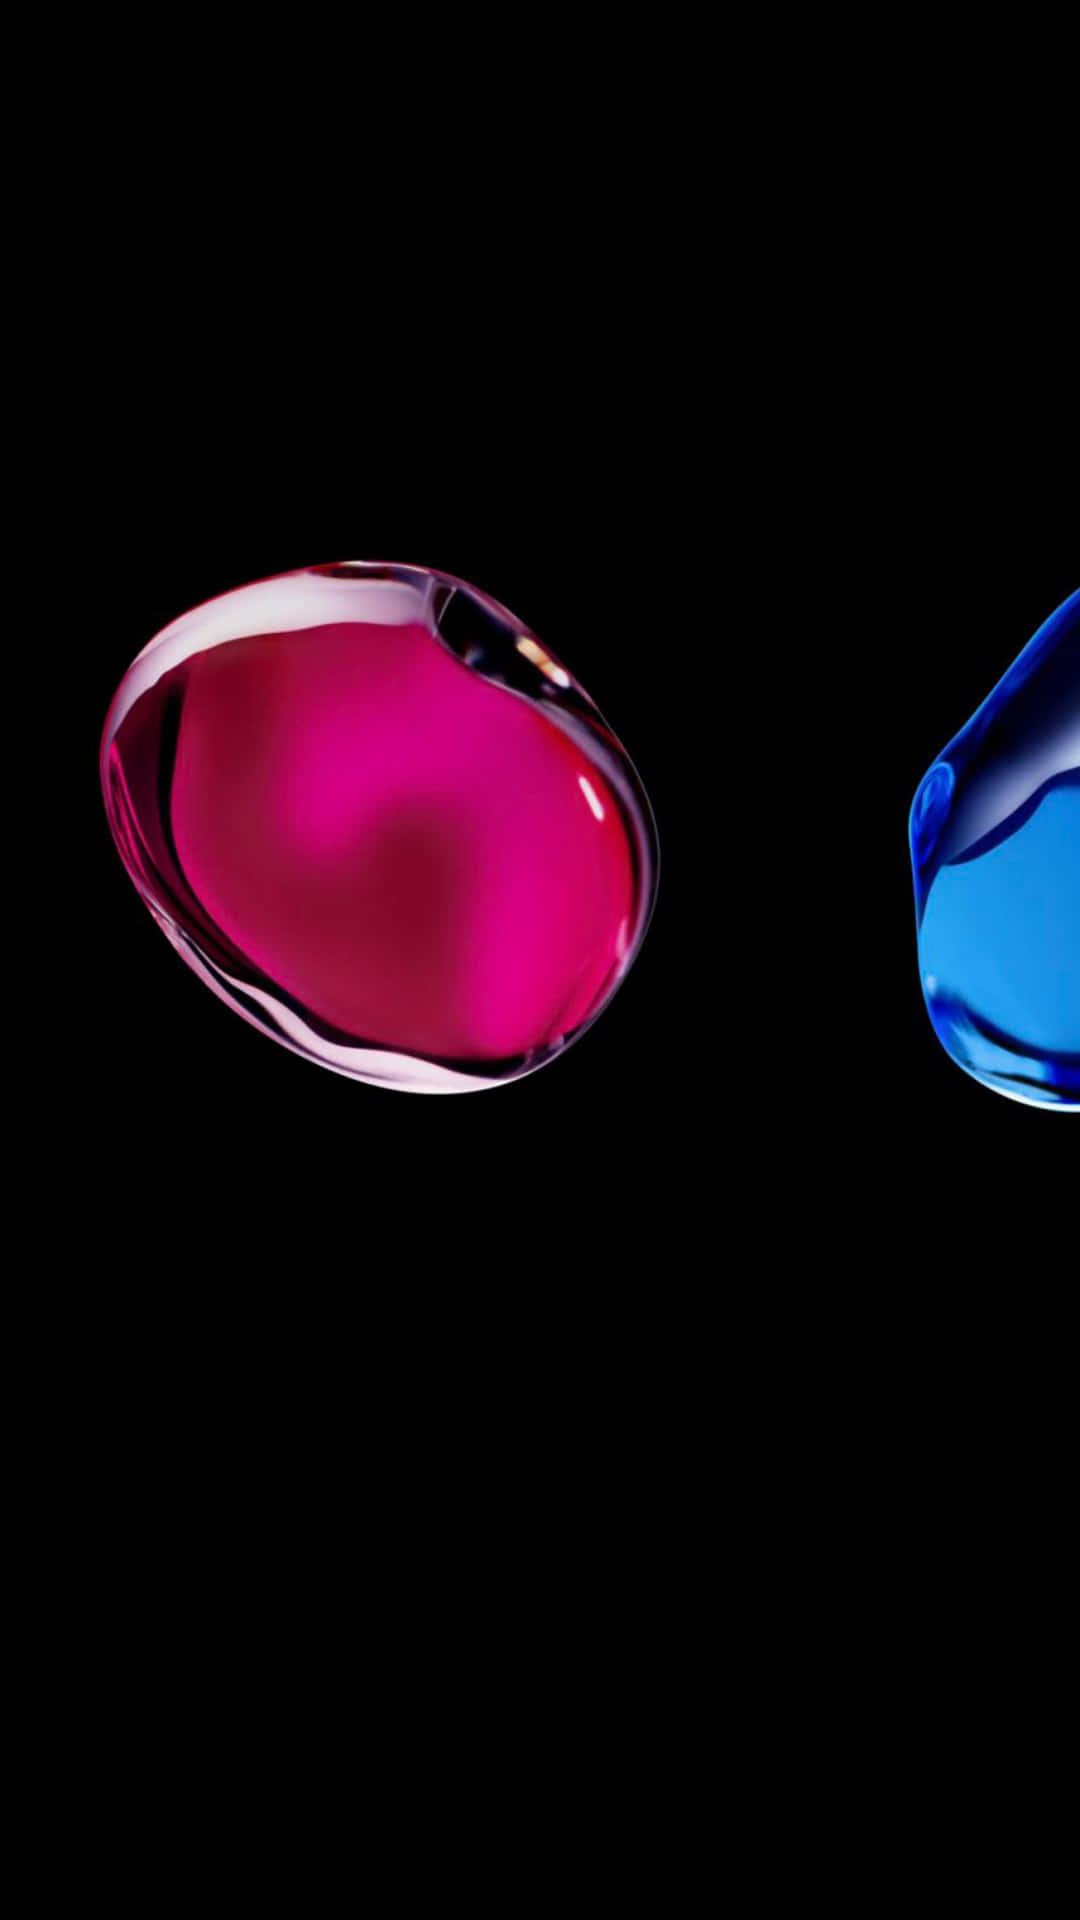 Two Blue And Pink Liquids On A Black Background Wallpaper